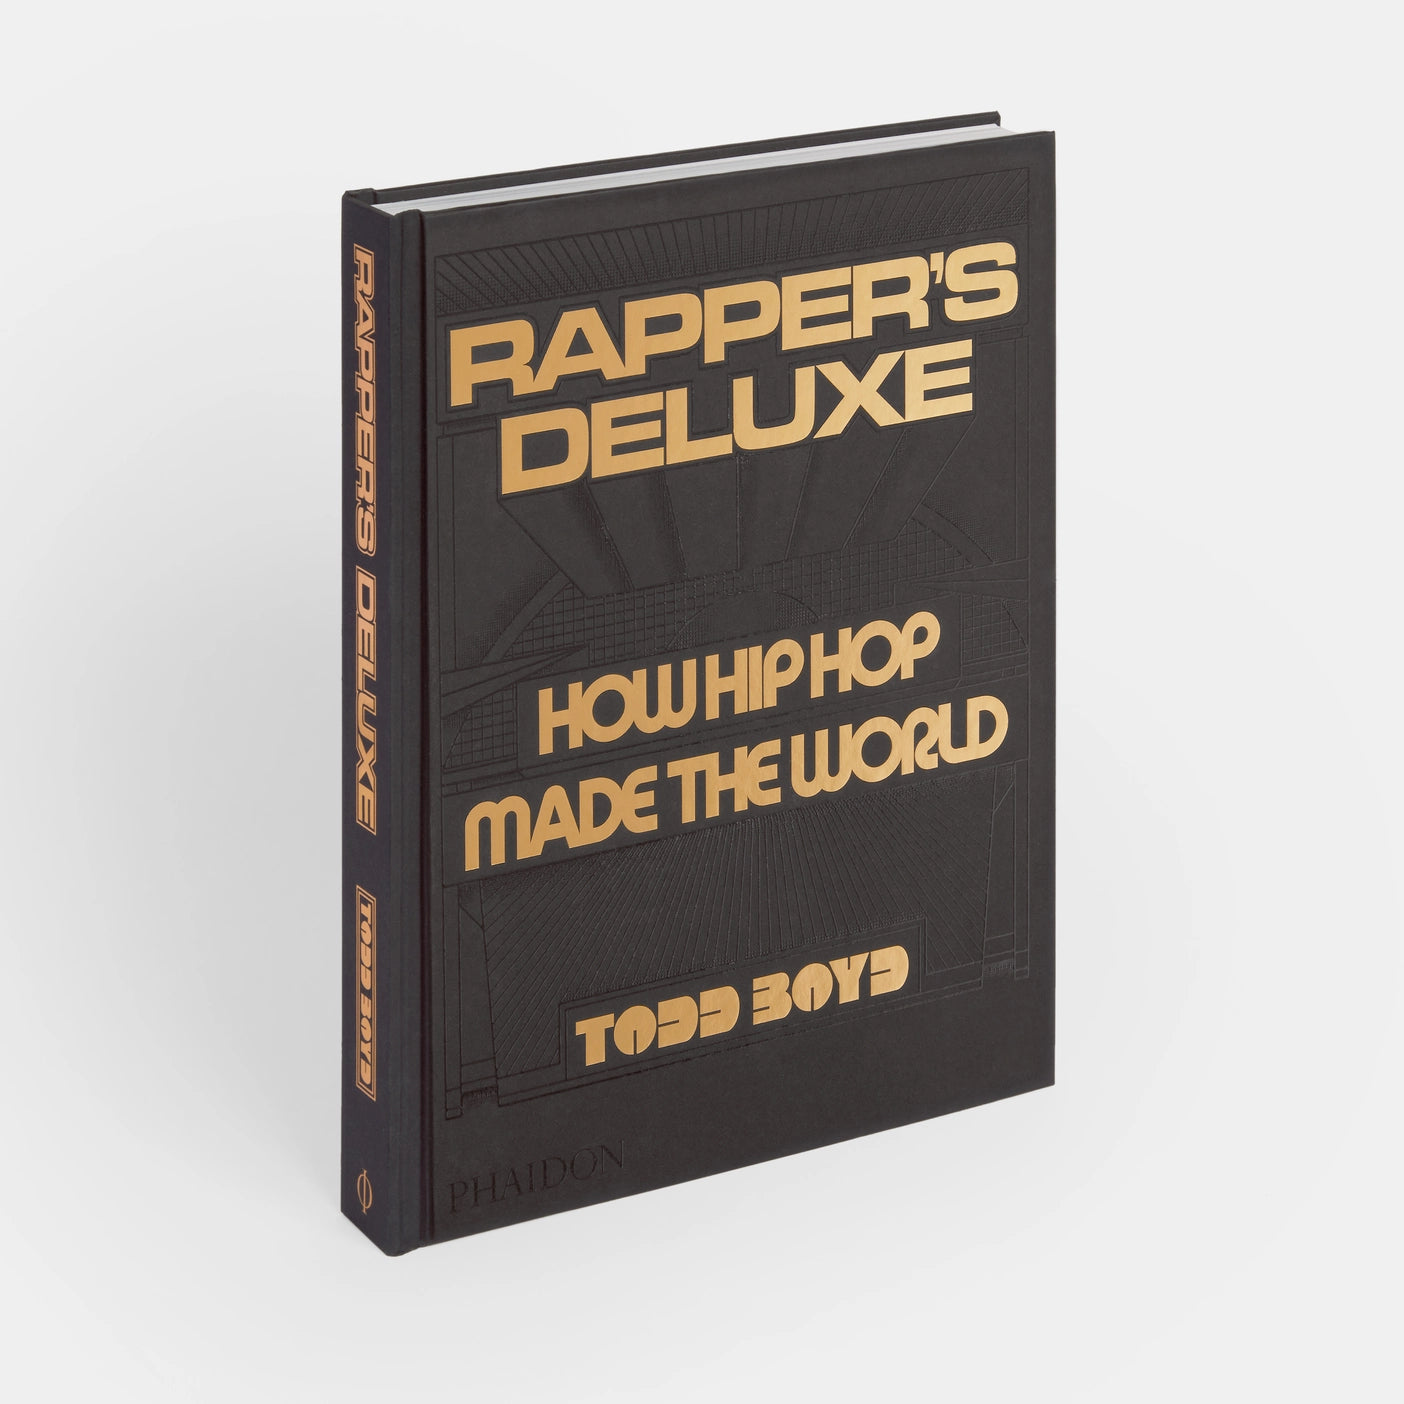 Todd Boyd - Rapper's Deluxe: How Hip Hop Made The World